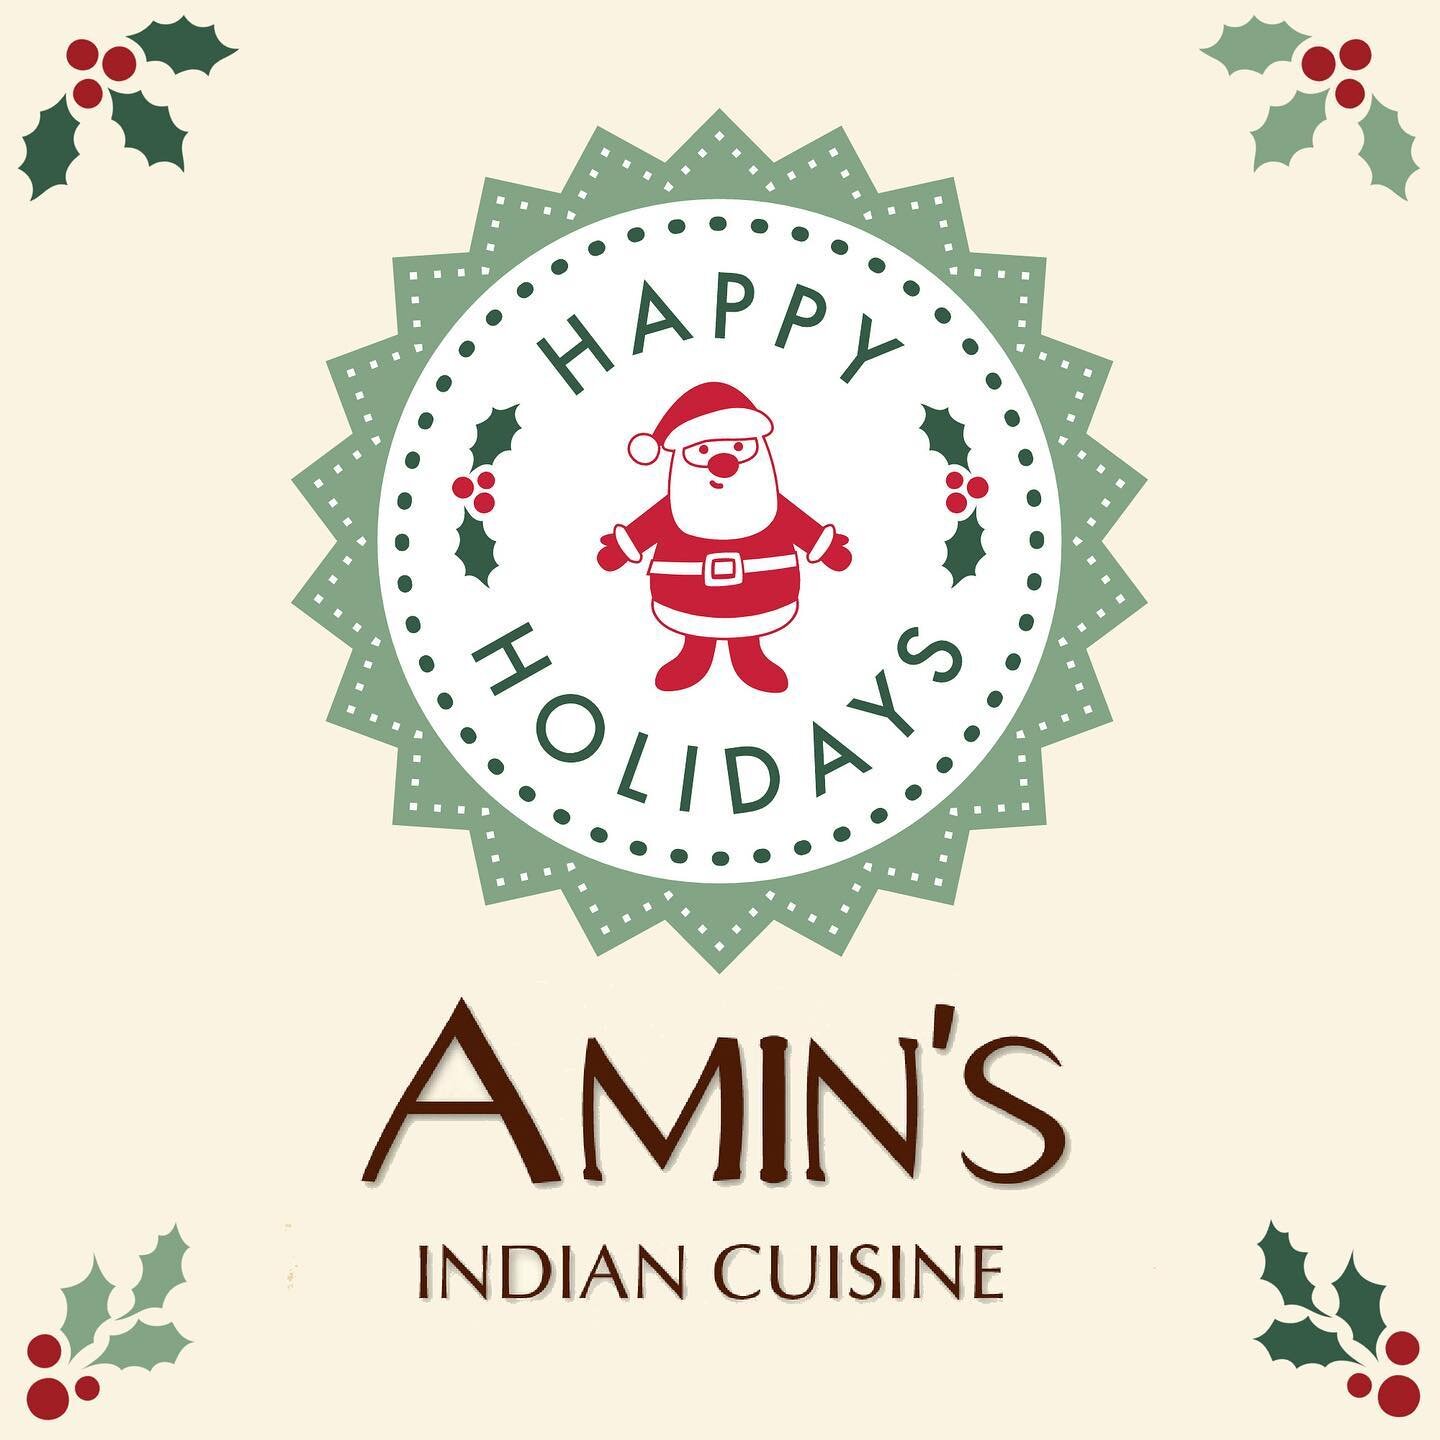 Happy Holidays from all of us at Amin&rsquo;s! We hope everyone has a relaxing and joyous time with their loved ones ❤️

Reminder we will be at the @hfxseaportmrkt tomorrow from 8-2 with our full menu and curry tubs to go! 😄